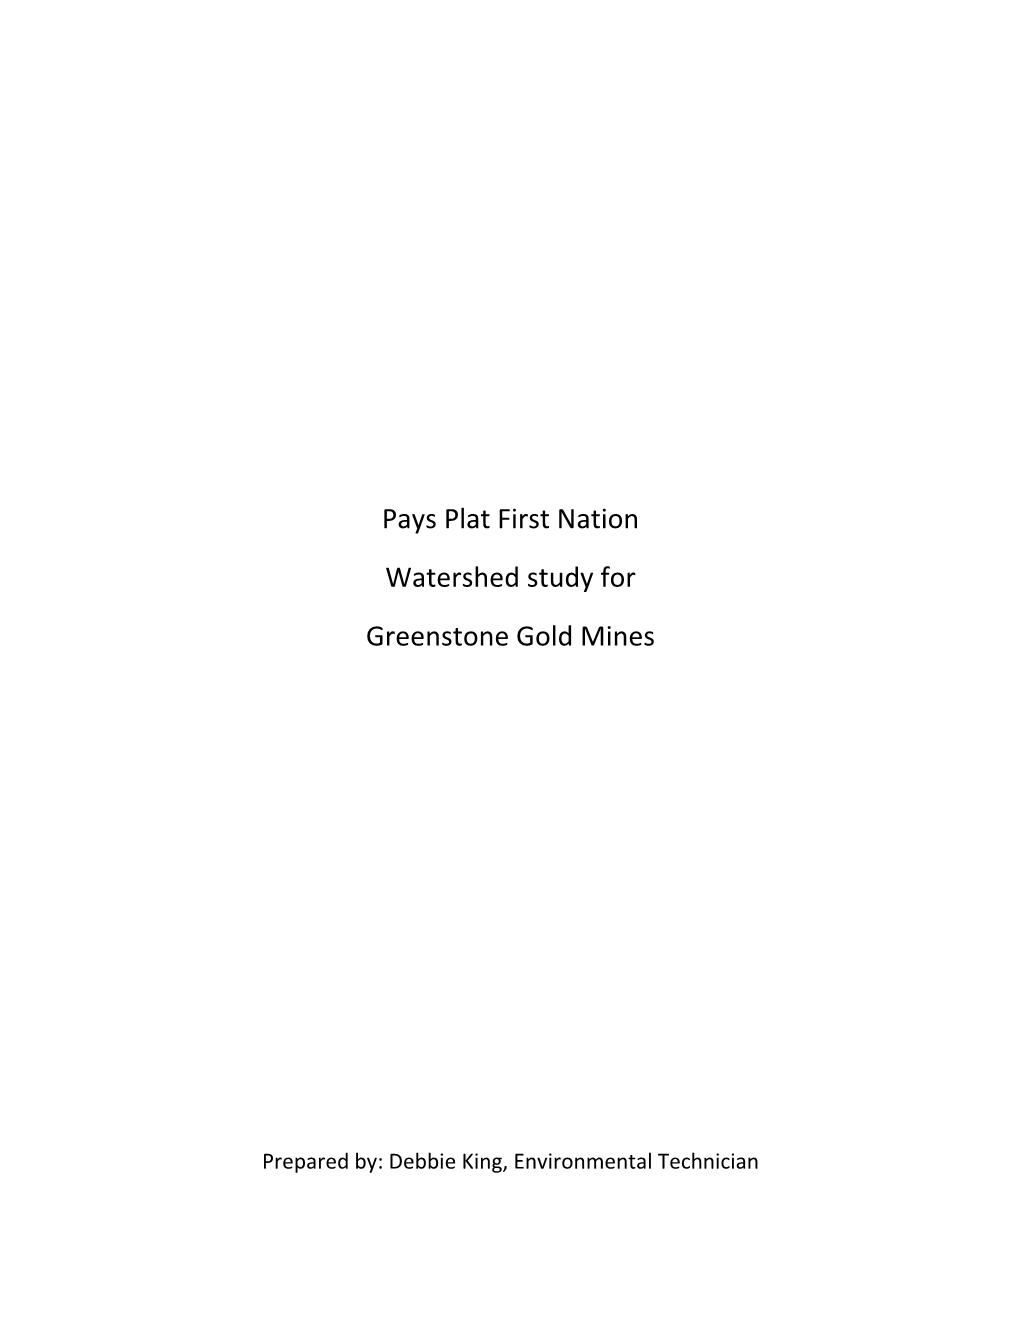 Pays Plat First Nation Watershed Study for Greenstone Gold Mines